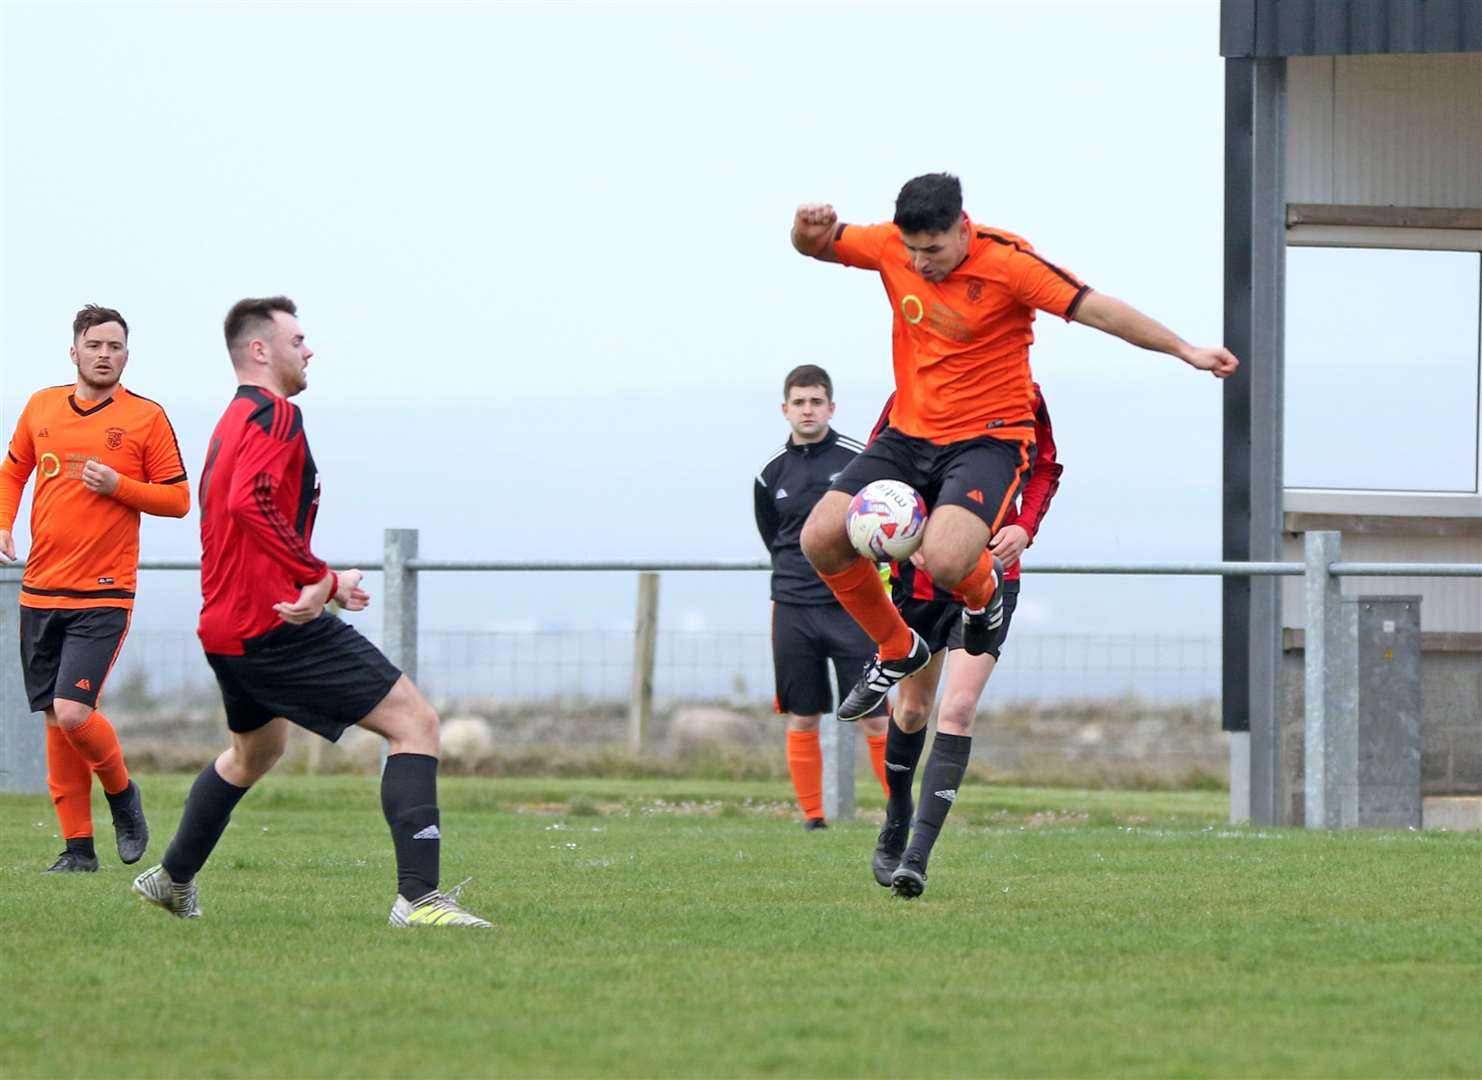 Saleem Bremner – pictured in action against Halkirk in the last Caithness AFA season, in 2019 – was on target for John O'Groats in their Colin Macleod Memorial Cup tie against Wick Groats this week. Picture: James Gunn